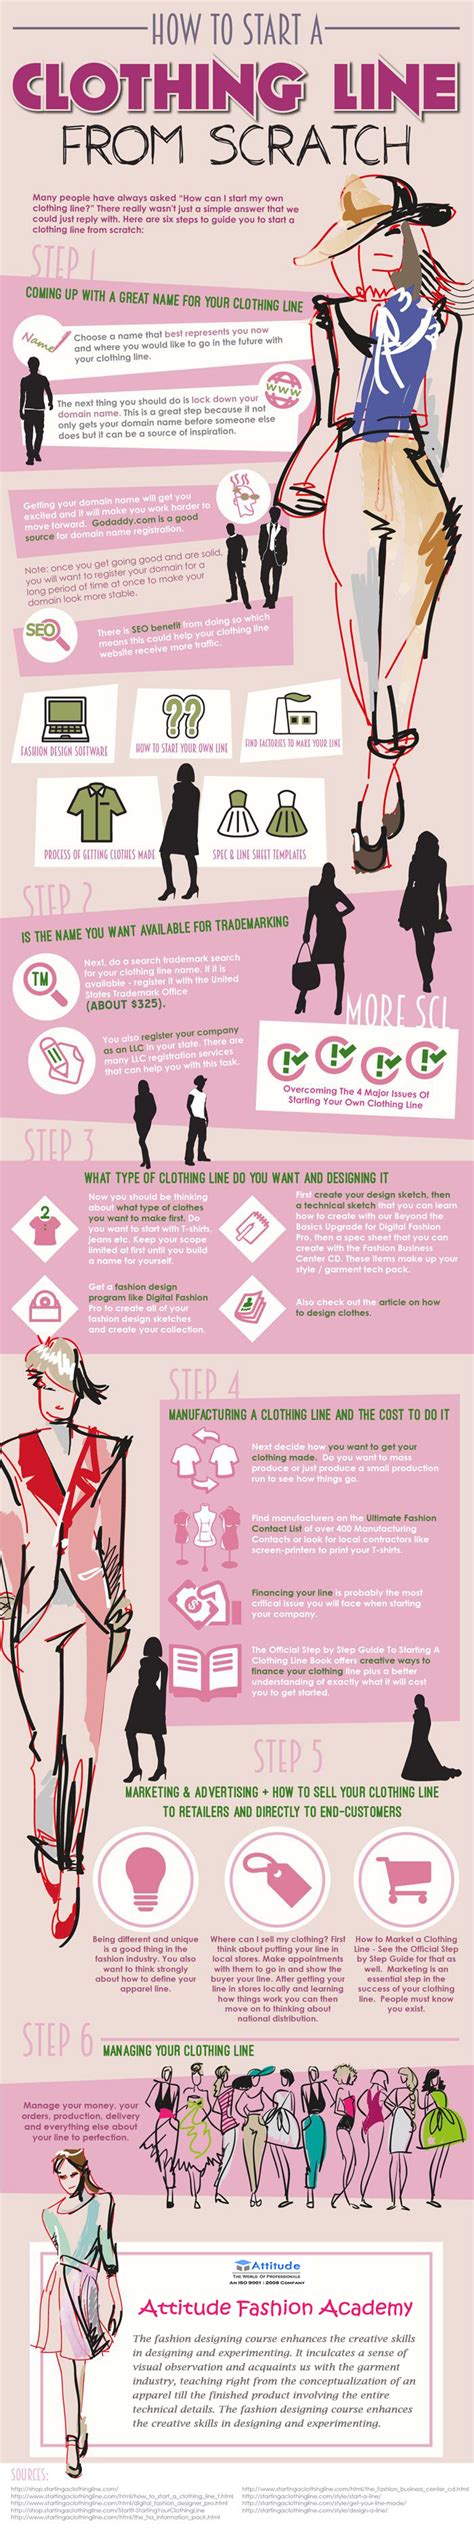 Results updated daily for start clothing line Infographic - How to Start your Clothing Business from ...